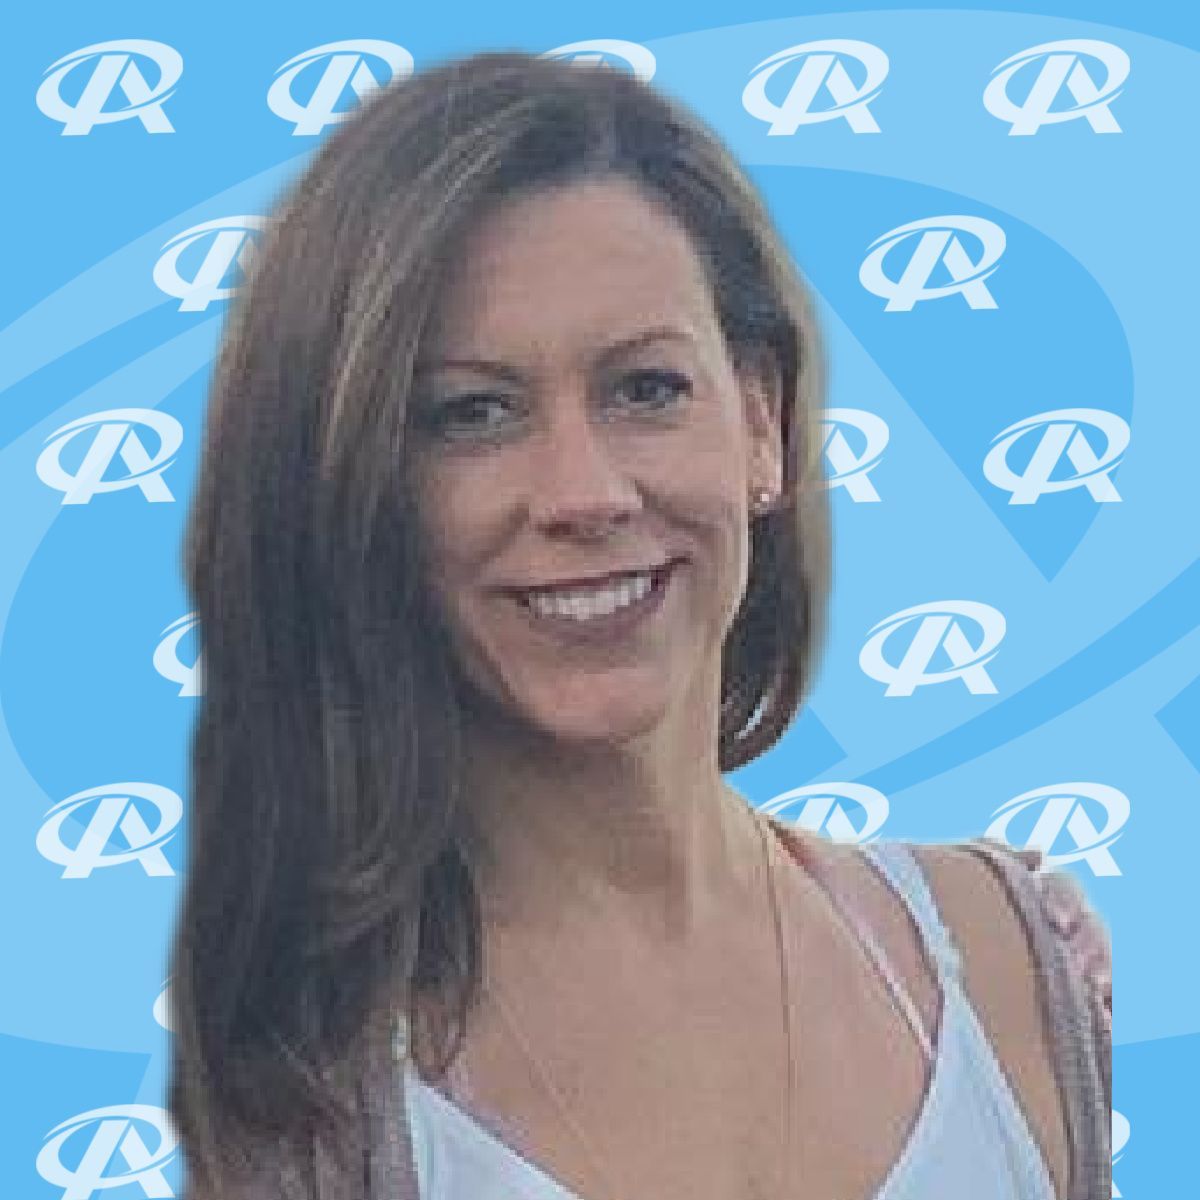 A woman is smiling in front of a blue background with the letter r on it.